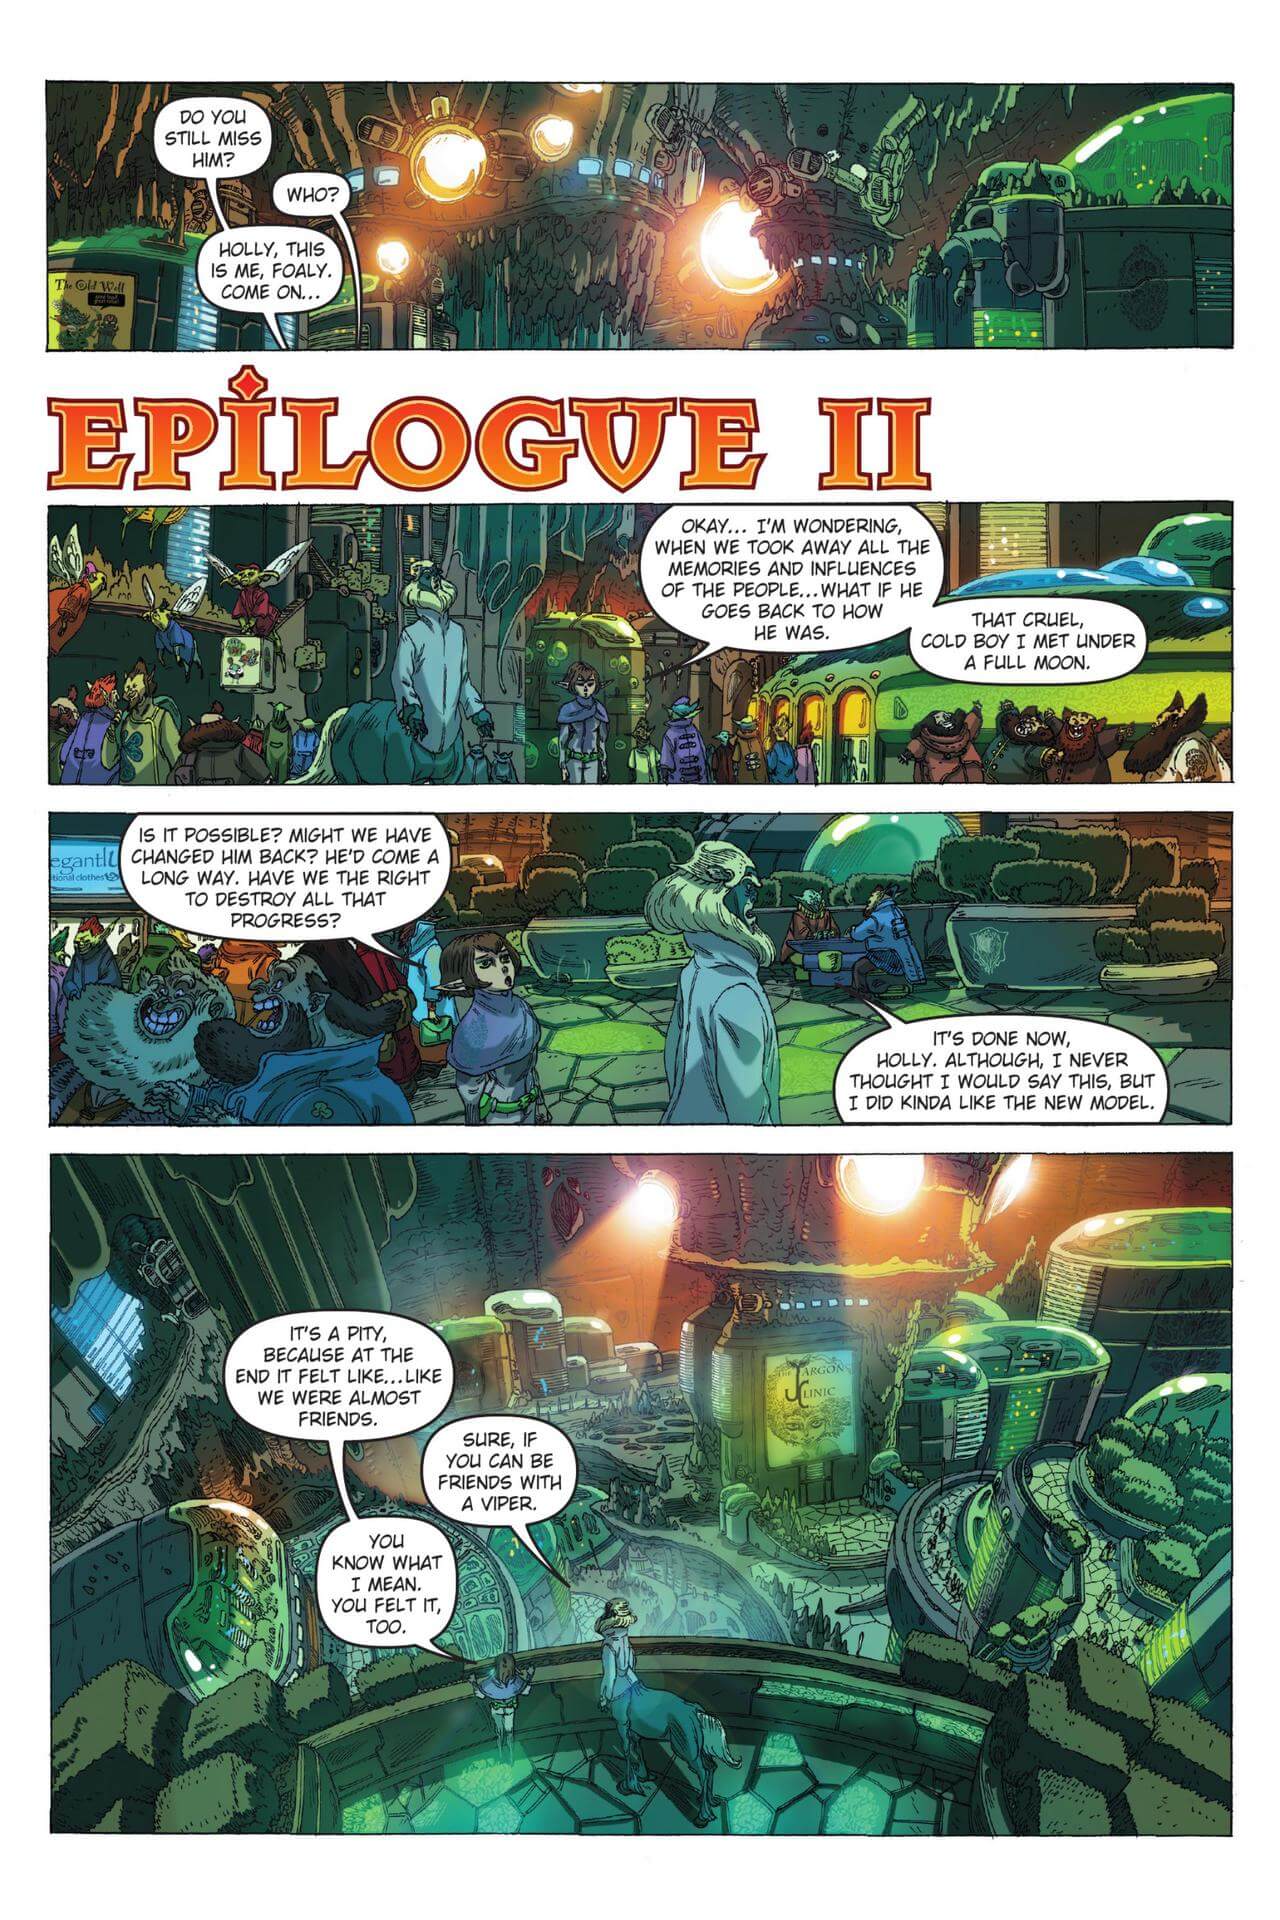 page 110 of artemis fowl eternity code graphic novel